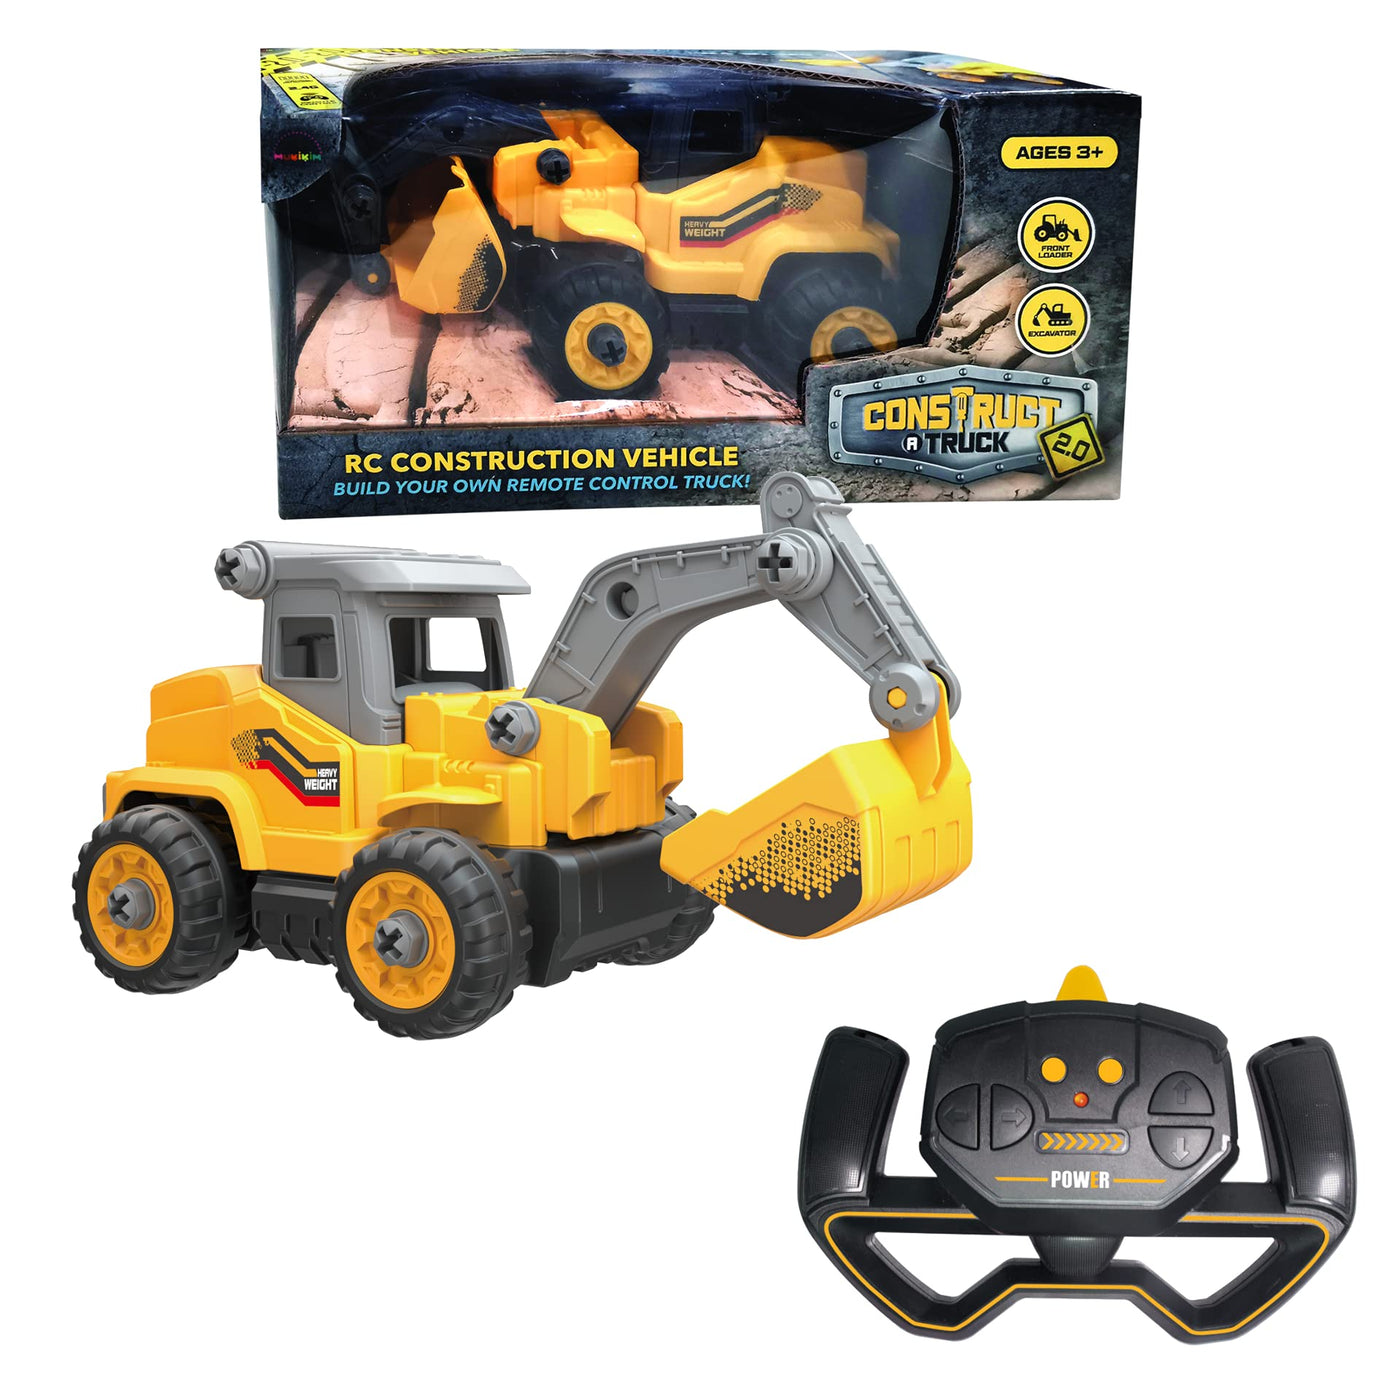 RC Construct a Truck 2.0 Excavator